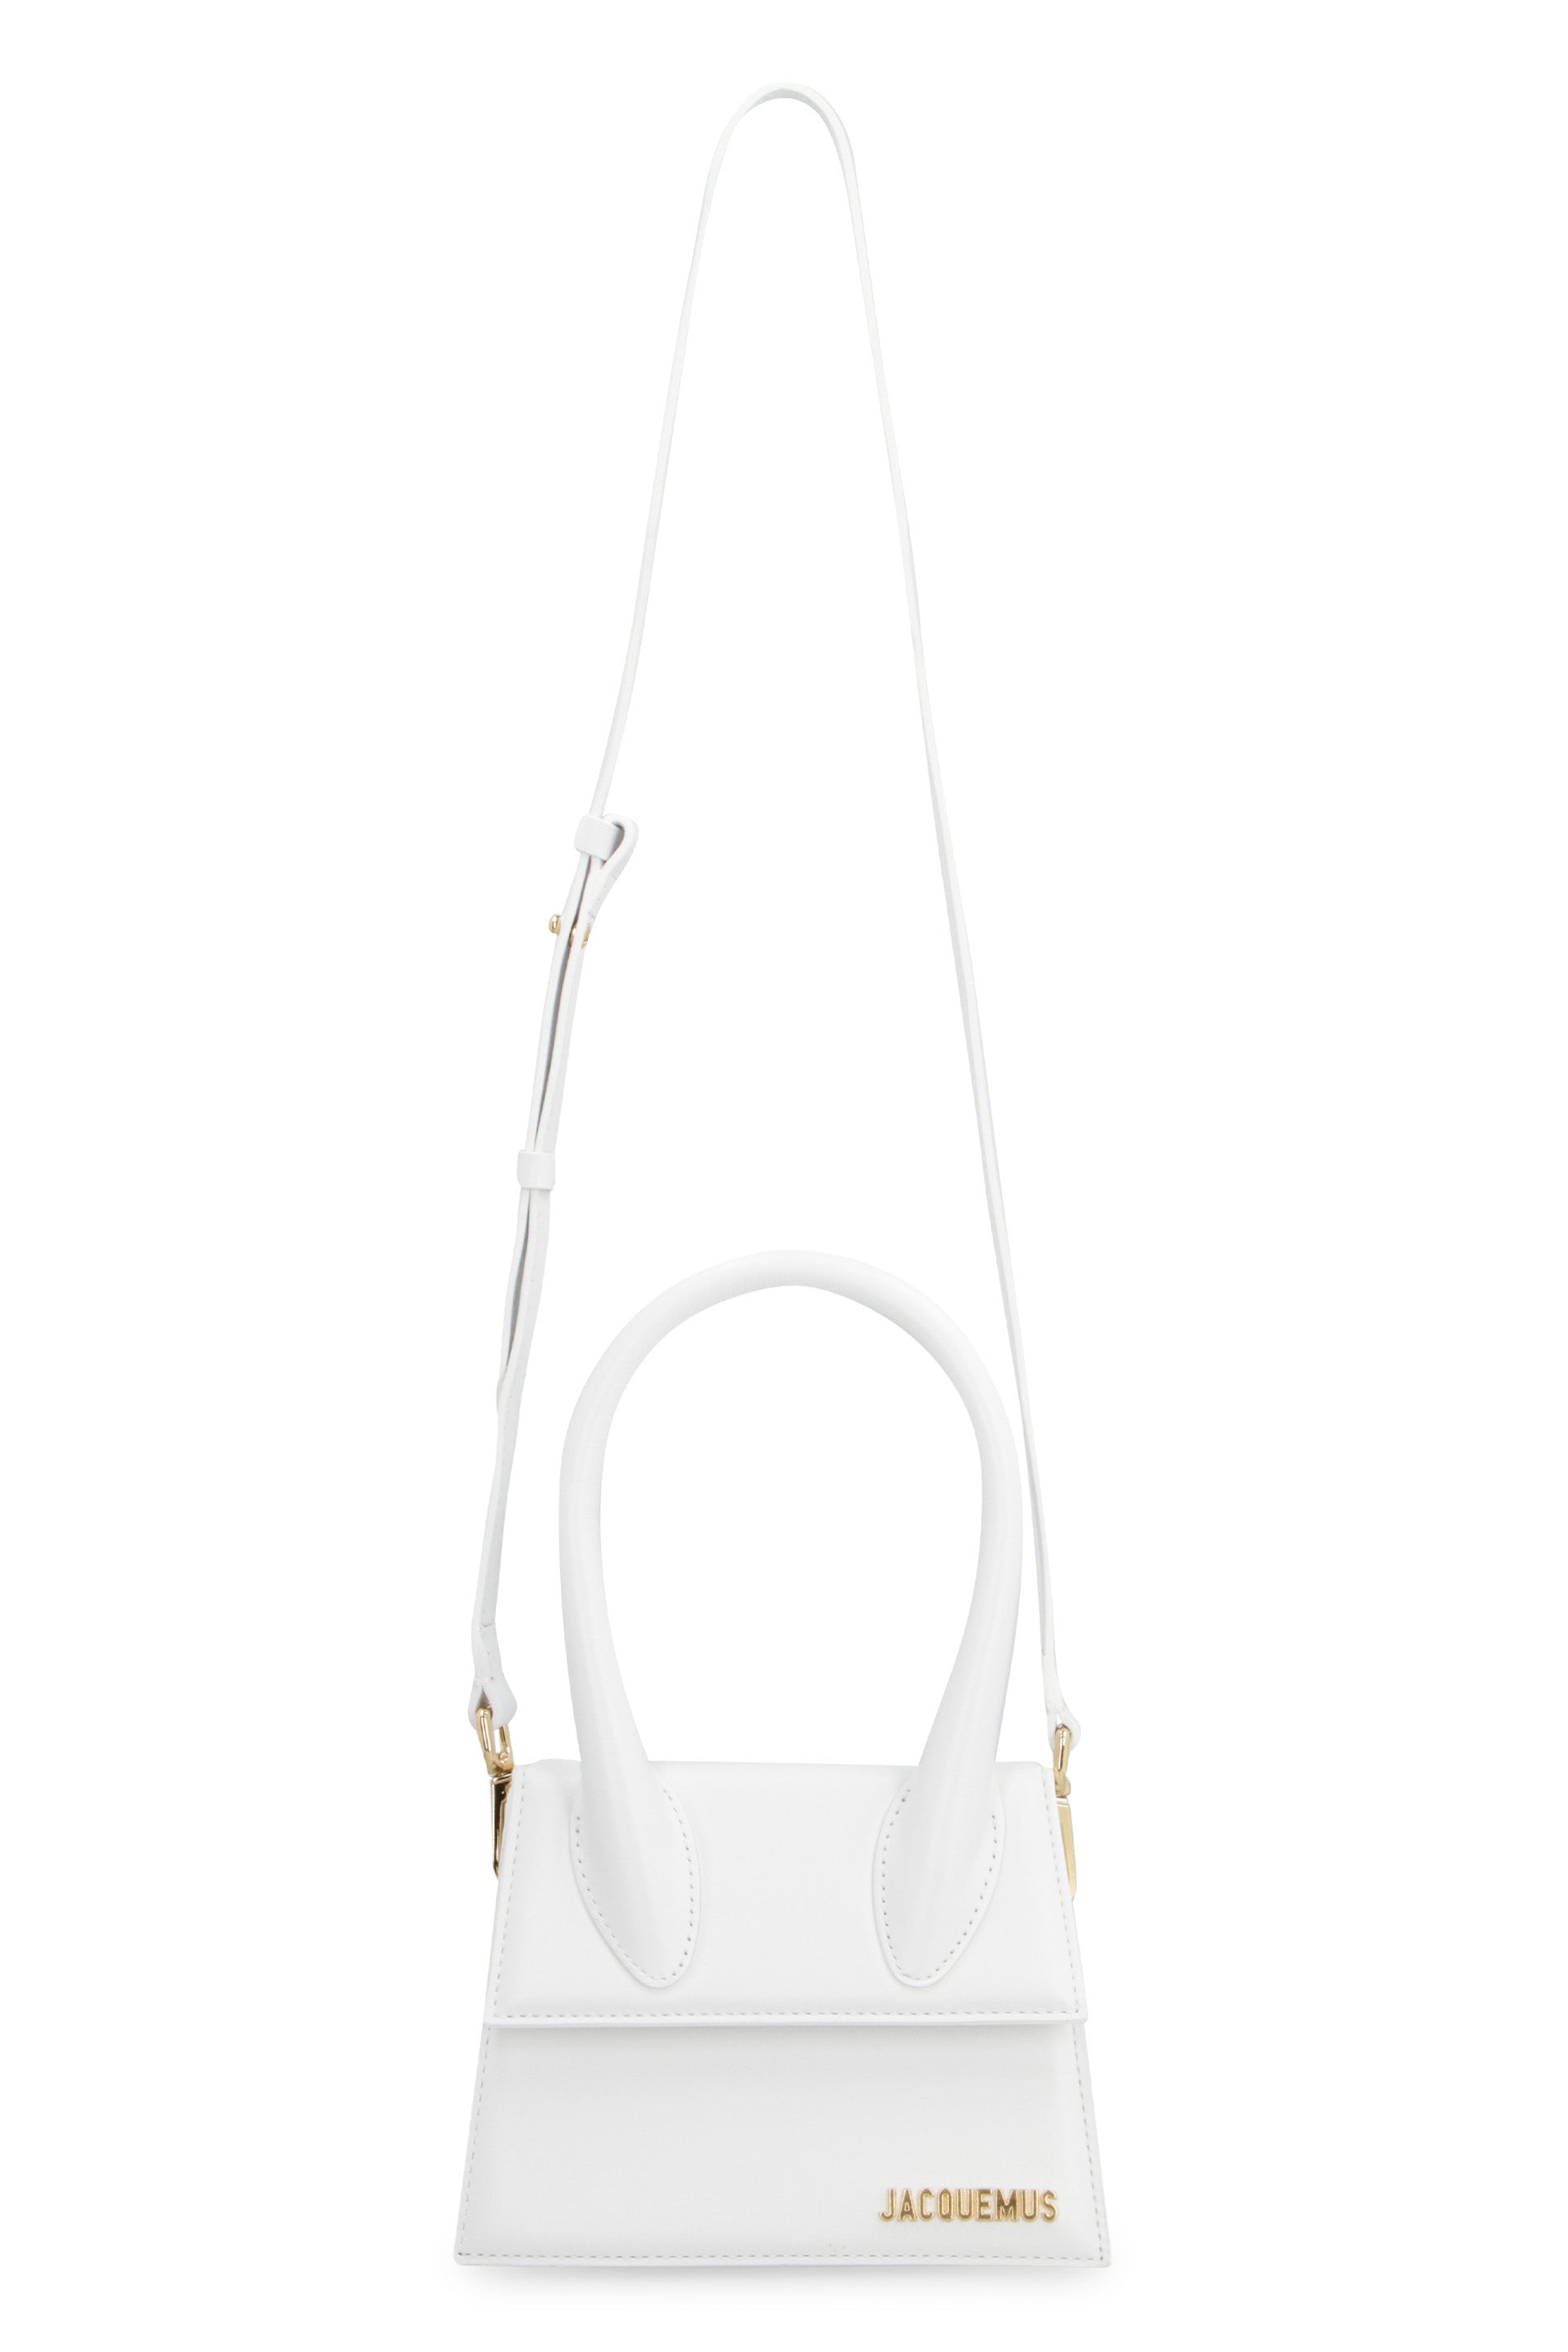 Jacquemus Le Chiquito Moyen Signature Handbag Light Green in Cowskin  Leather with Gold-tone - US